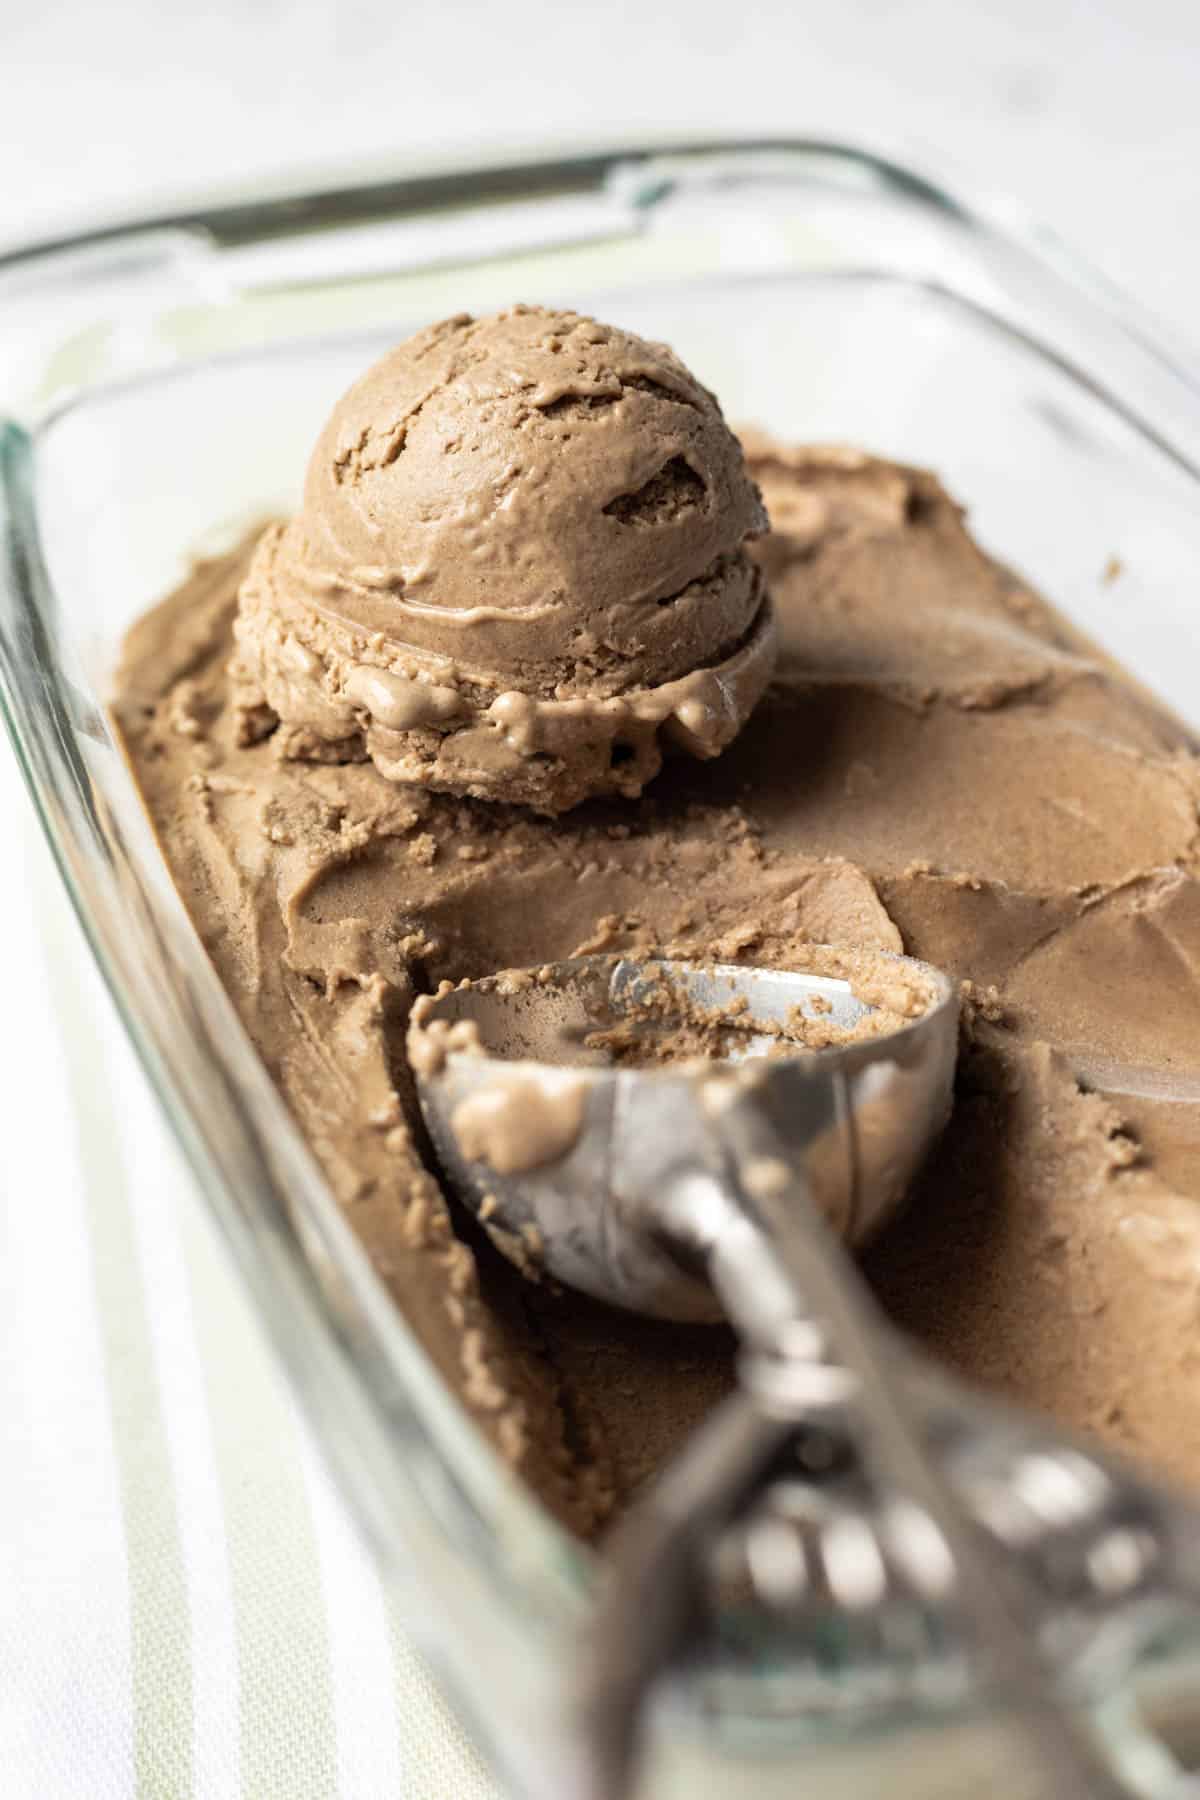 Date sunflower seed ice cream in a glass dish with a scoop resting on top.